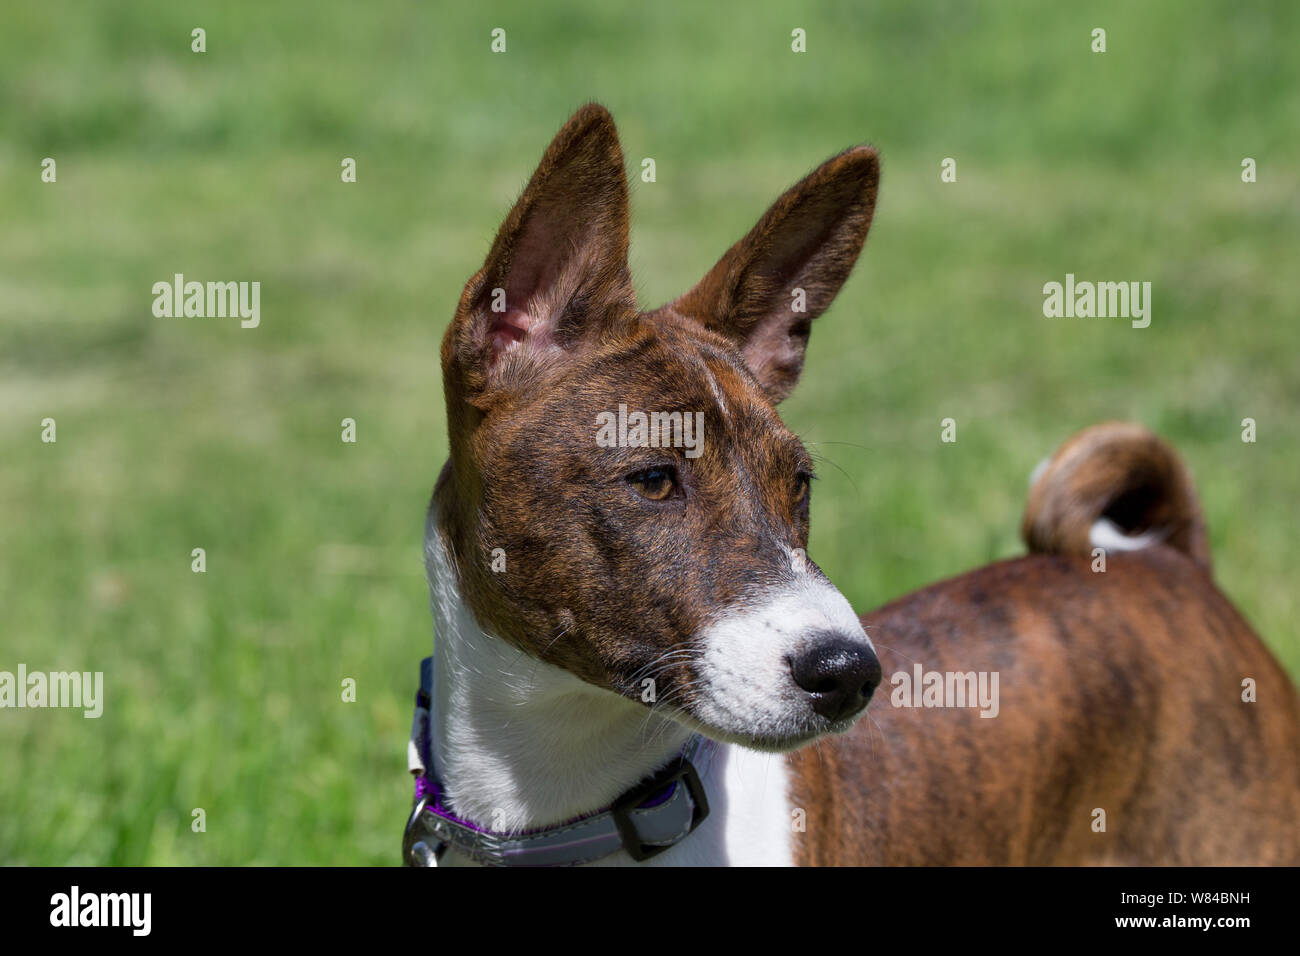 Cute brindle basenji puppy is standing on a green grass. Close up. Pet animals. Purebred dog. Stock Photo